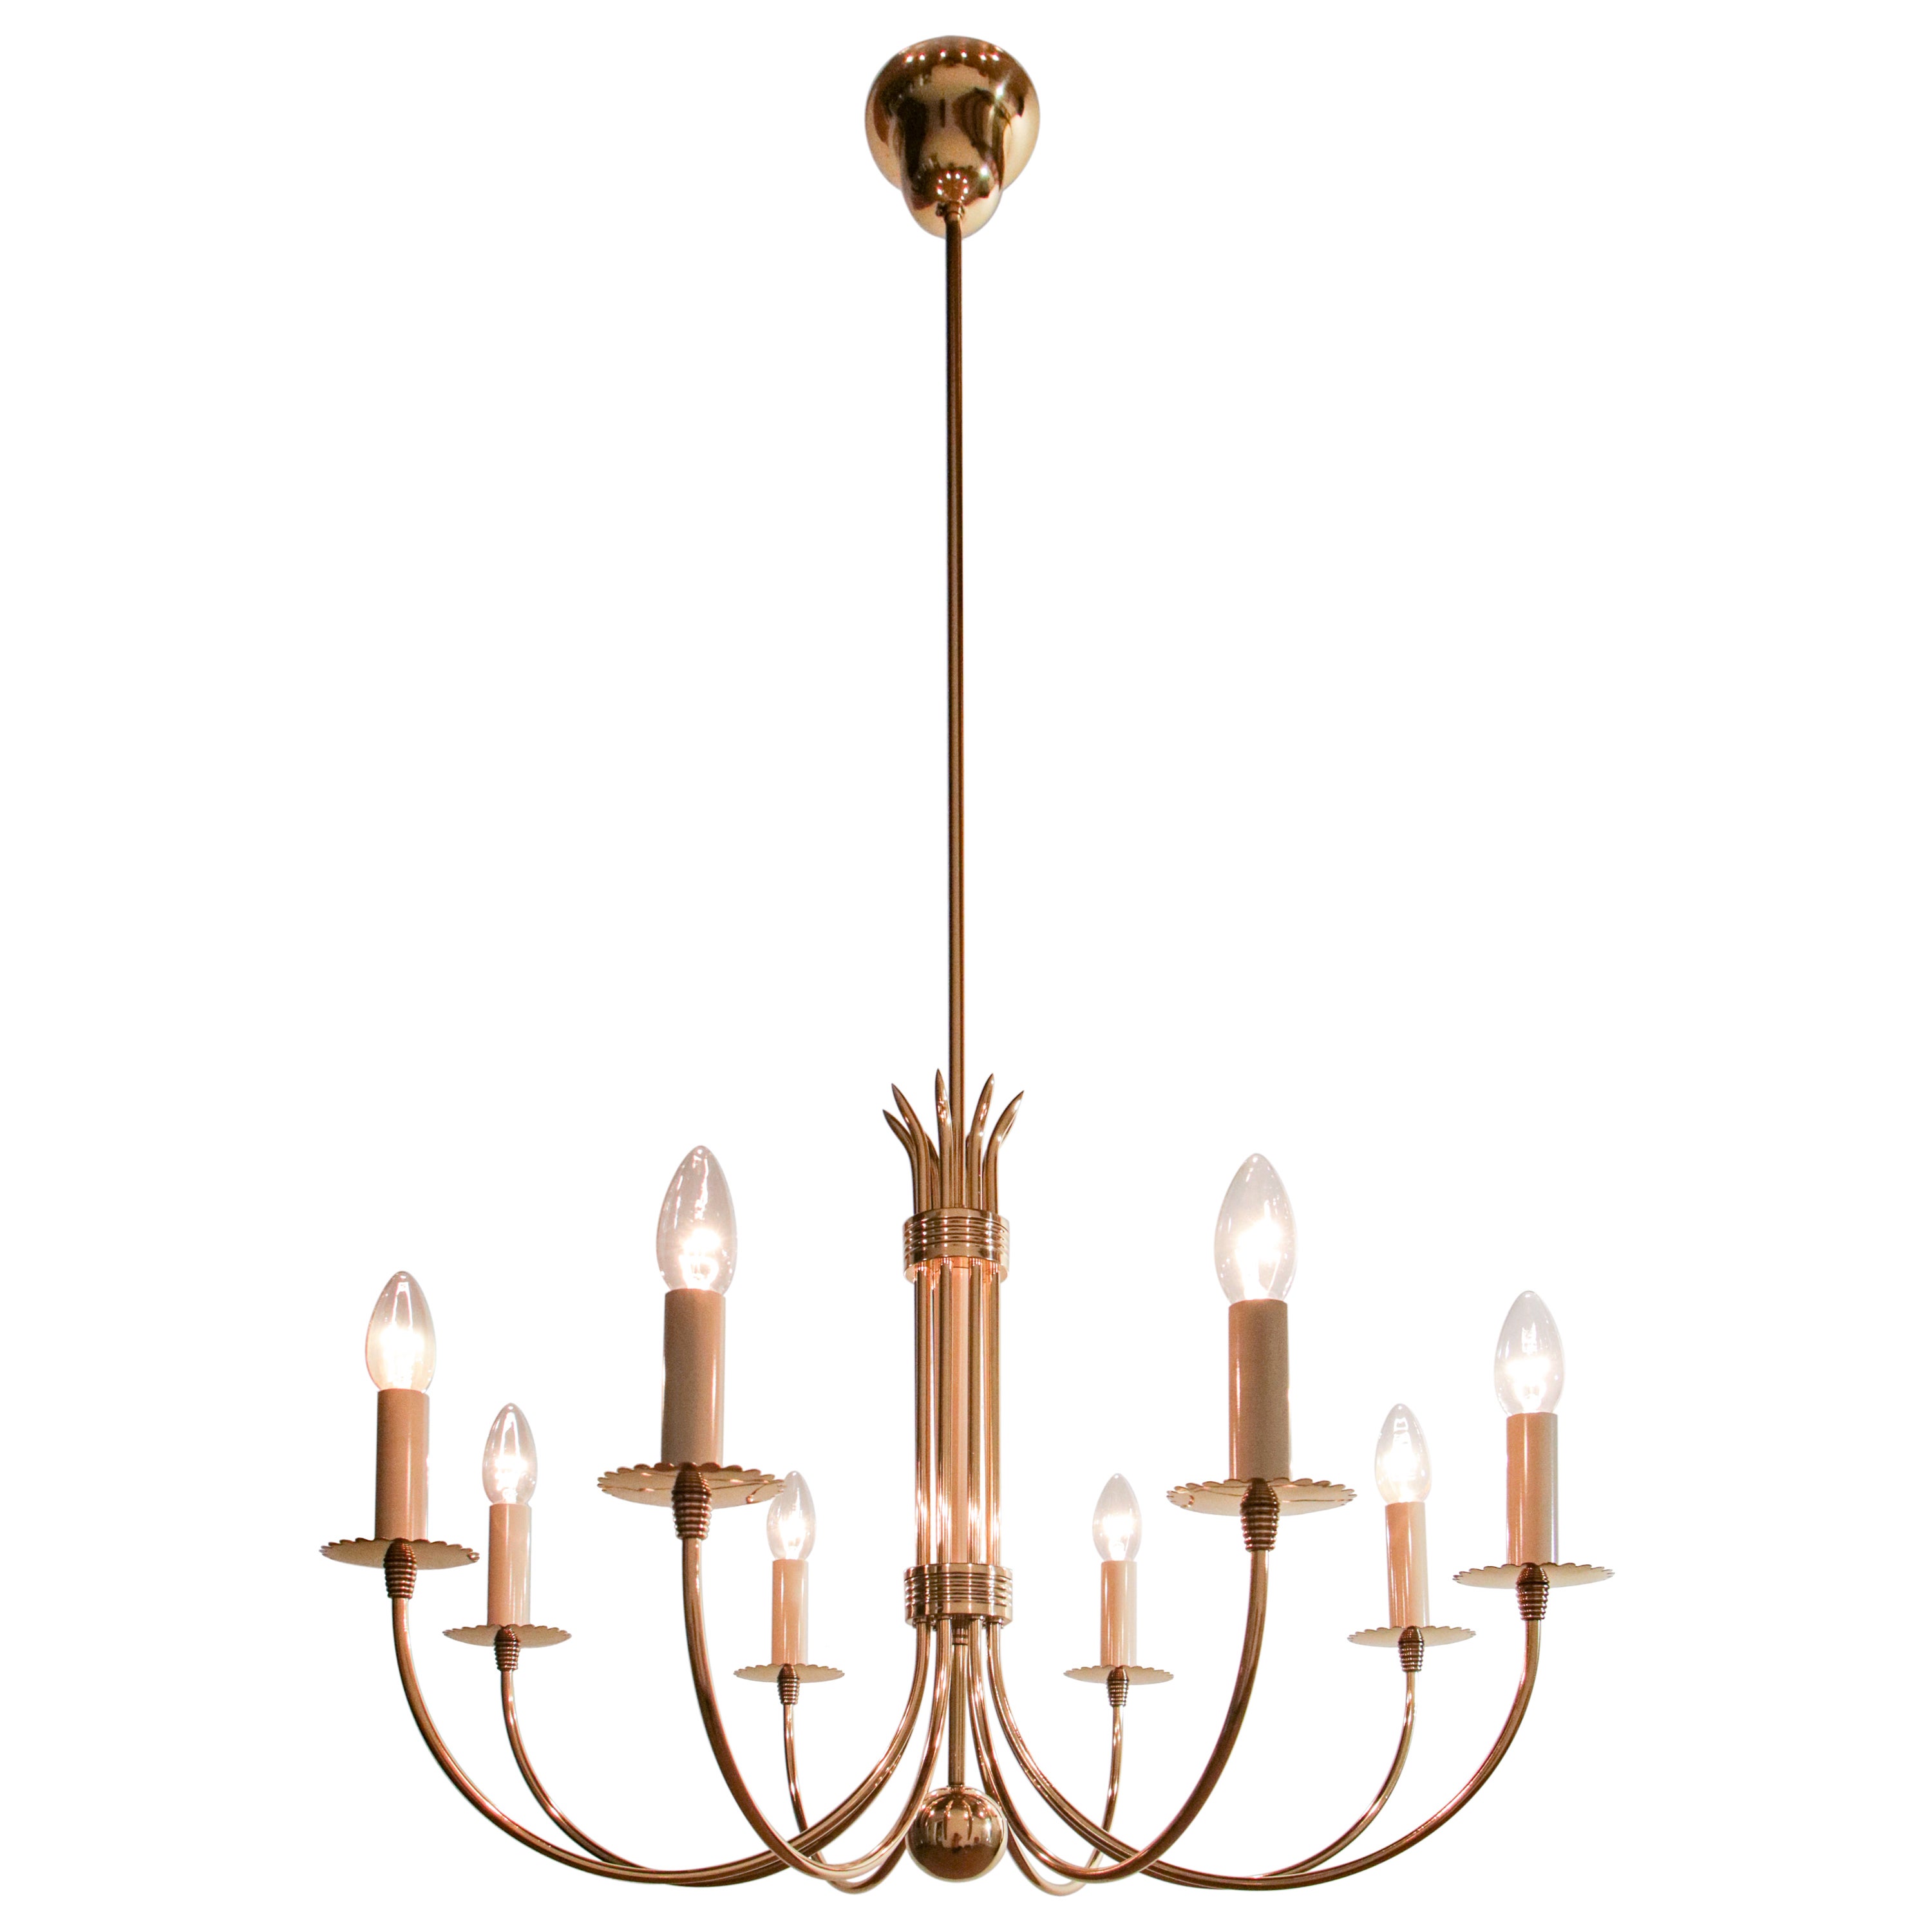 Magnificent Italian mid-century chandelier attributed to Guglielmo Ulrich from the 1945s. The chandelier is made of bright brass and ivory lacquered aluminum. It has eight lights in E14 format. We recommend viewing the images at maximum to